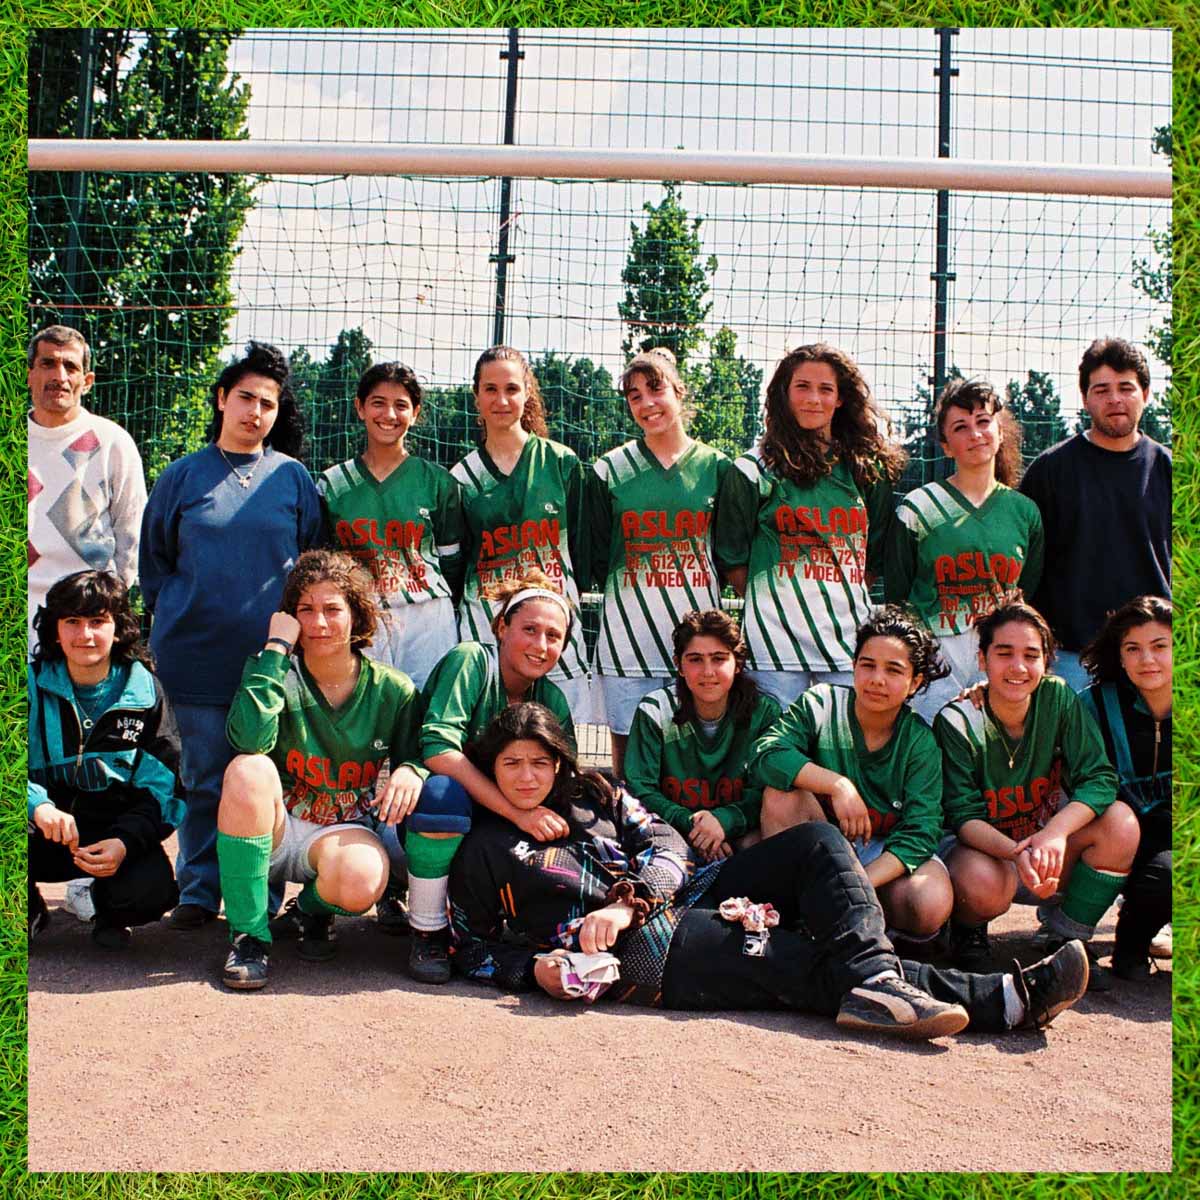 Team picture of the BSC Agrisport girls in front of a football goal. The back row stands, framed by two men, the front row kneels and the goalkeeper lies in front of the front row and is embraced by a teammate. Almost everyone is wearing the green and white jerseys of their club and looking at the camera. There is a frame around the picture showing green football turf symbolising the football focus of Pop-Kultur.